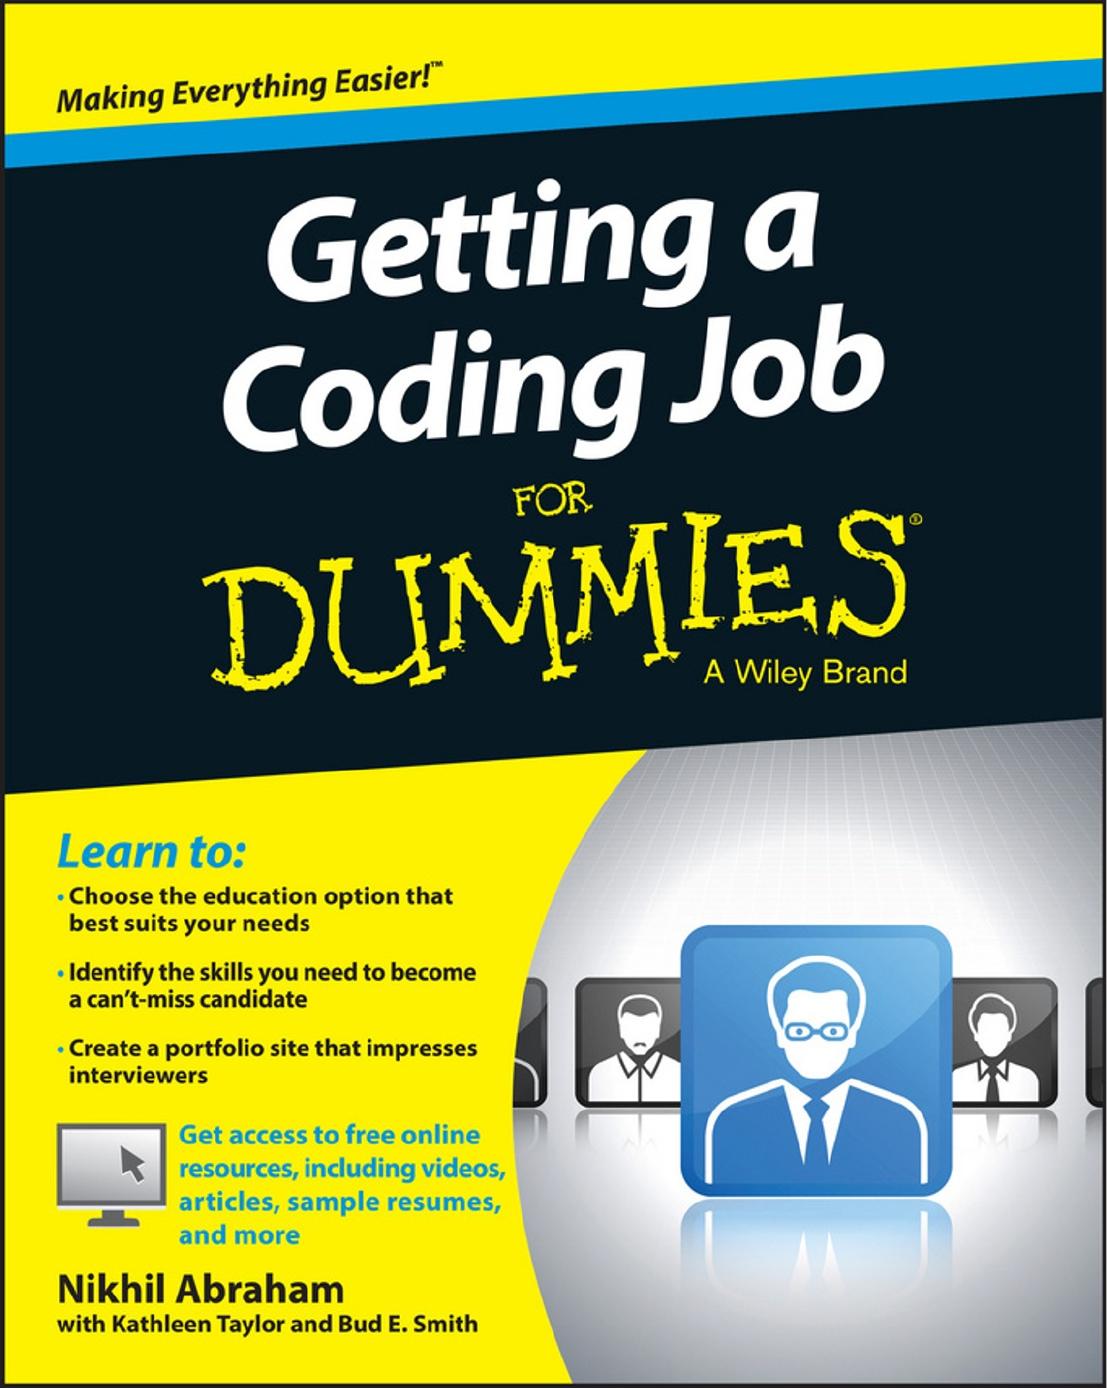 Getting a Coding Job For Dummies by Nikhil Abraham